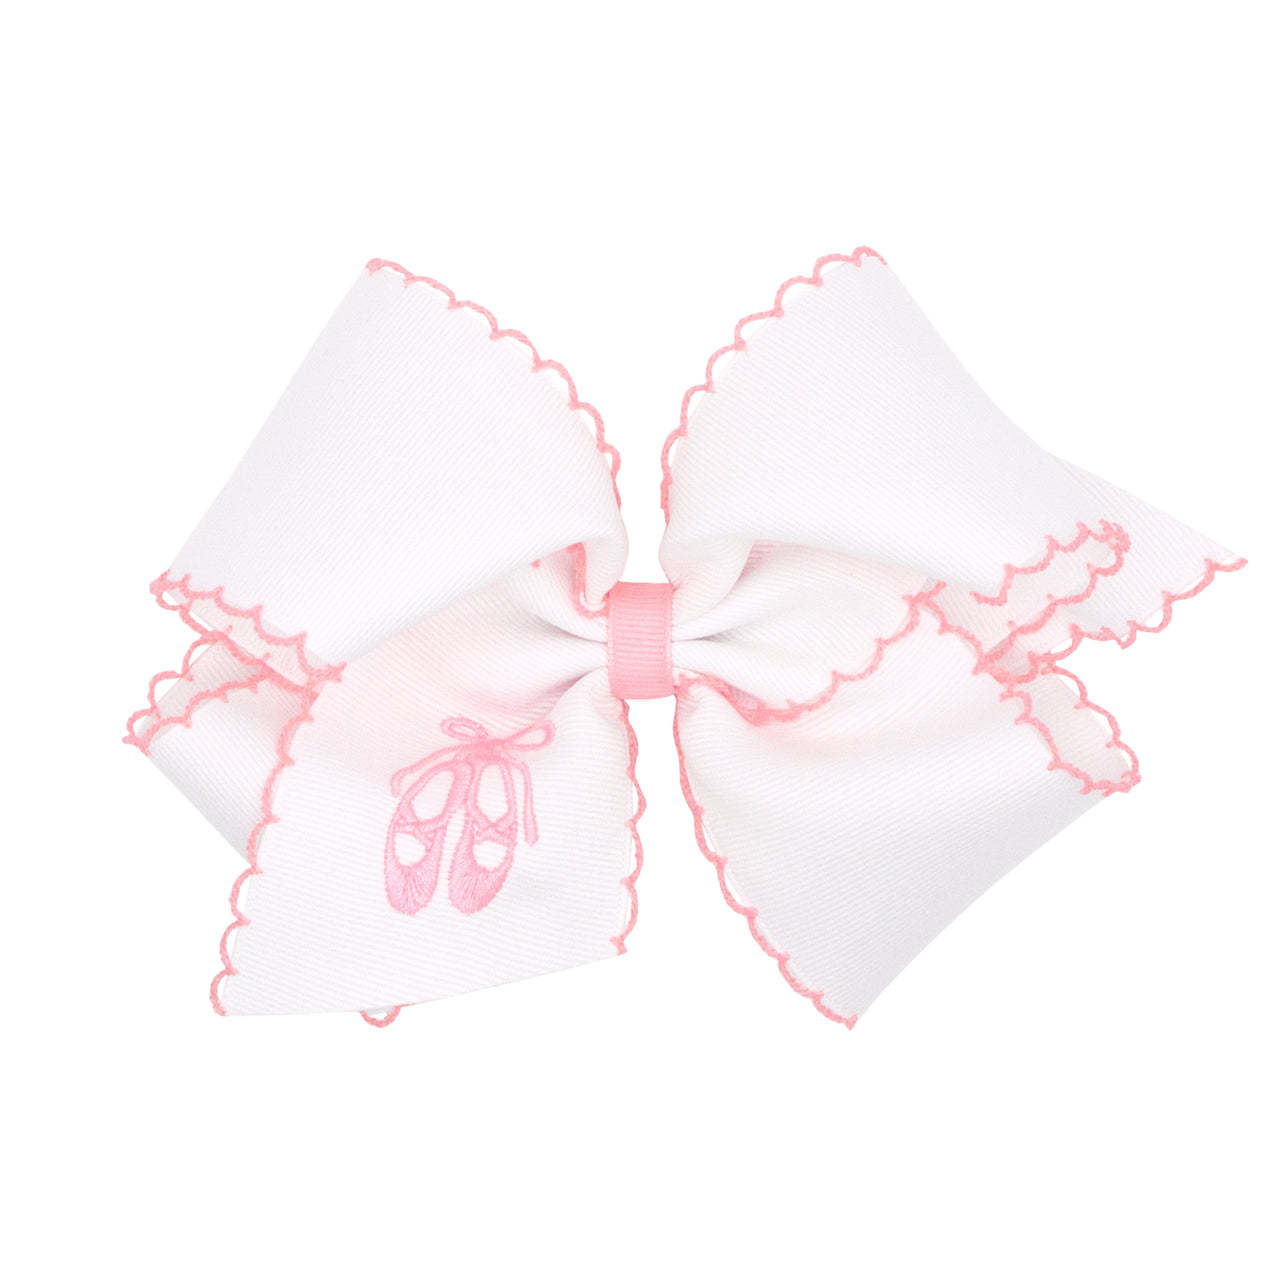 Wee Ones King Grosgrain Bow w/ Embroidery & Moonstitch Edge